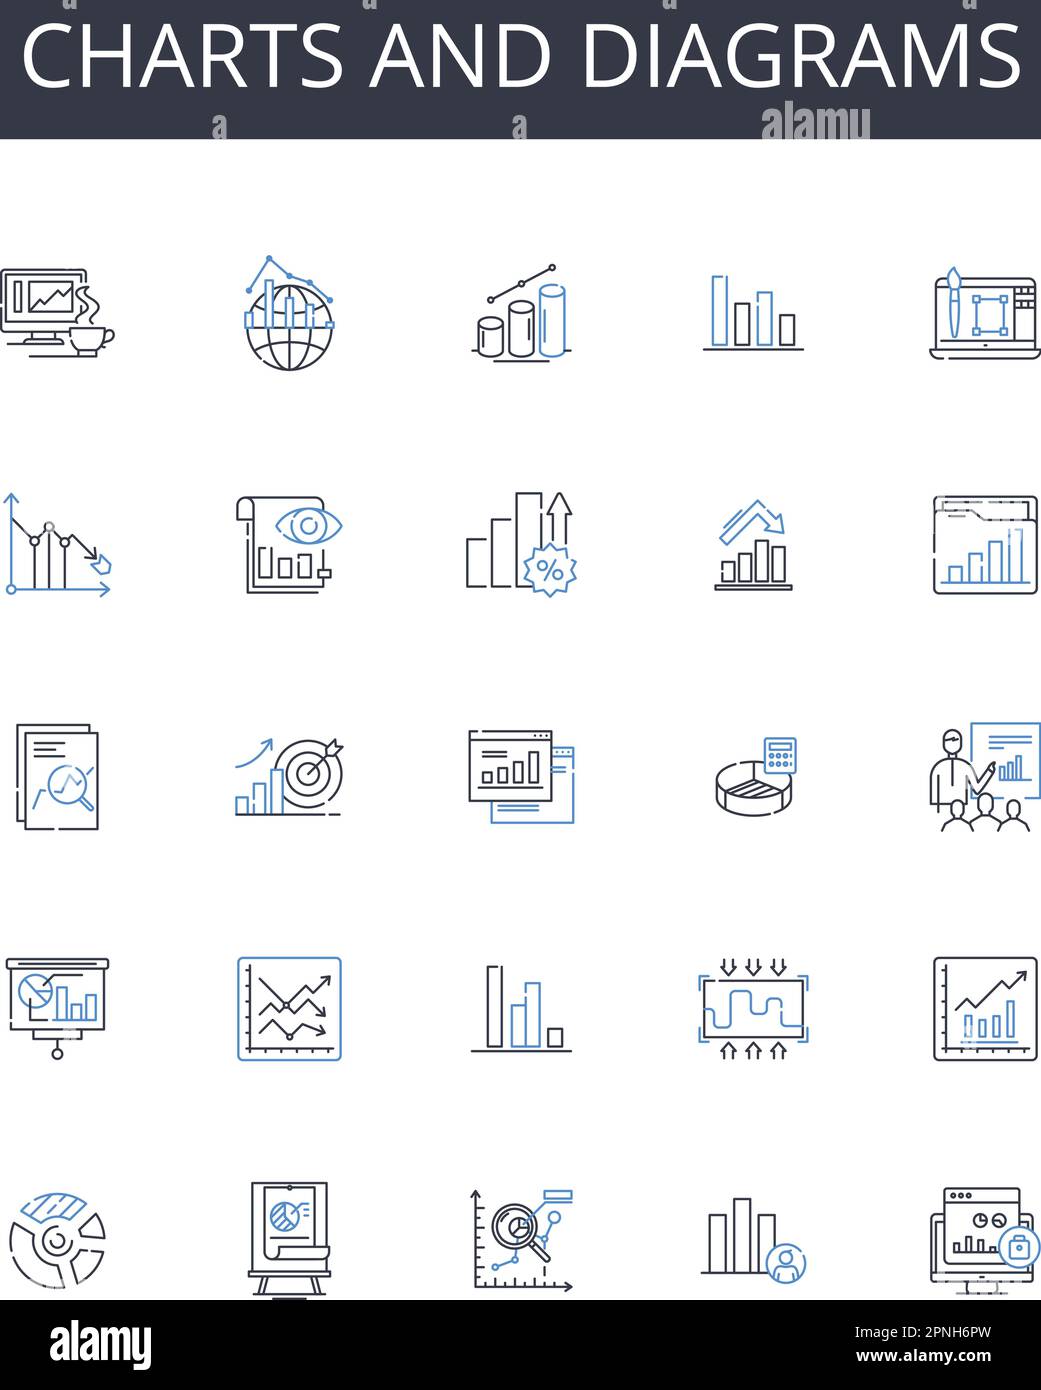 Charts and diagrams line icons collection. Segmentation, Consumer behavior, Competitive analysis, Demographics, Trends, Perception, Insights vector Stock Vector